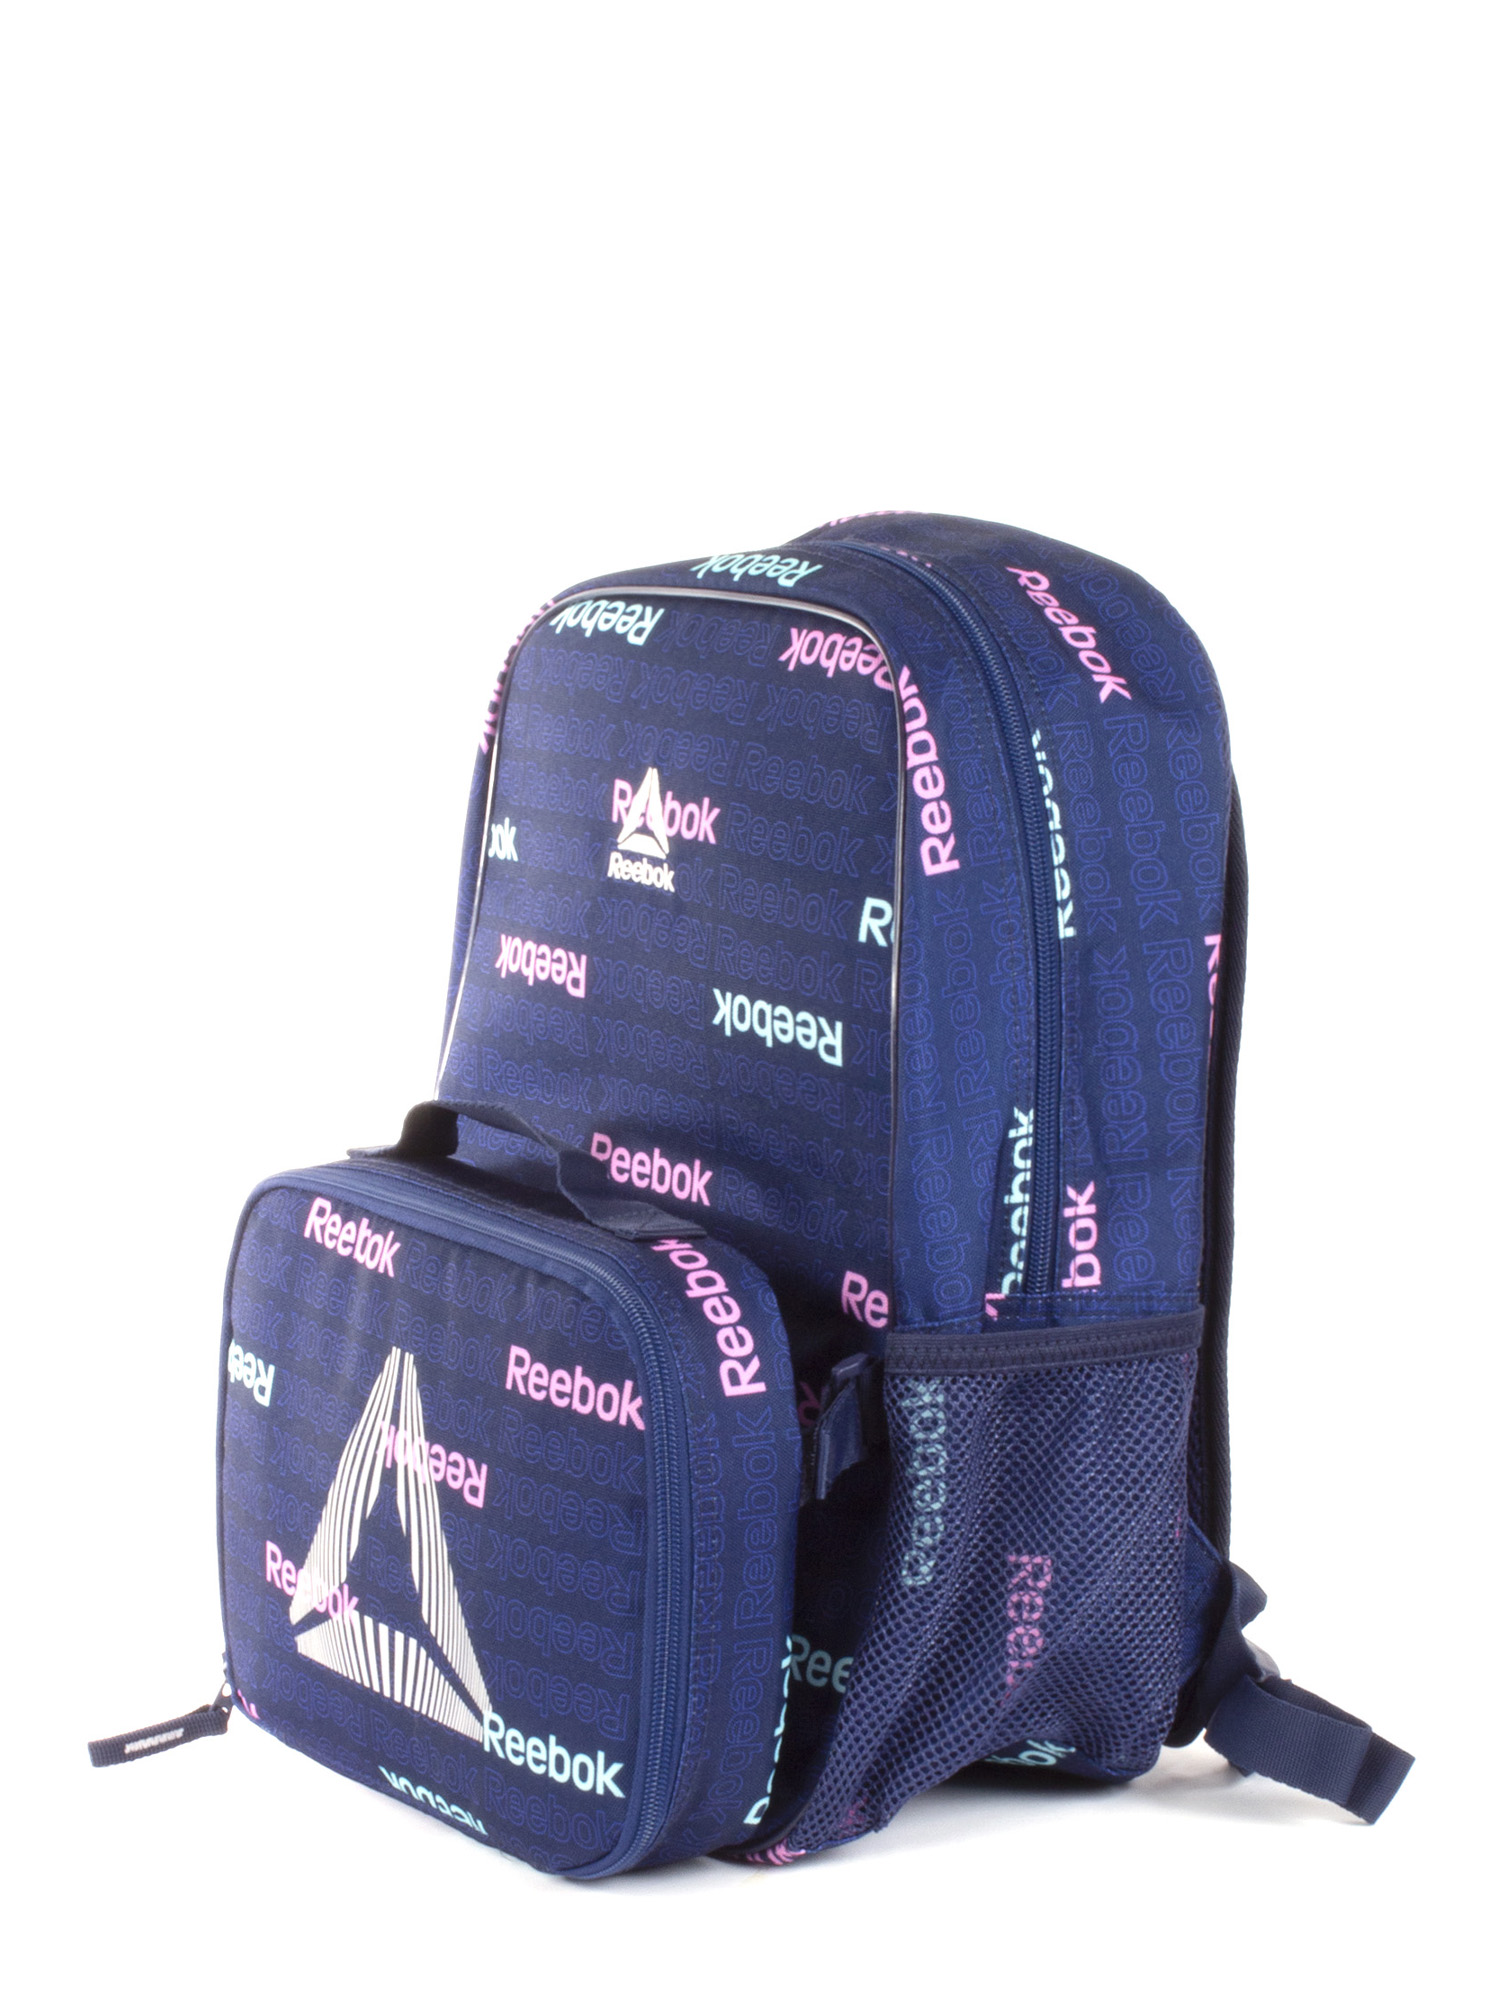 Reebok Kids Backpack With Lunch Bag Set 2-Pieces - Blue - image 2 of 2